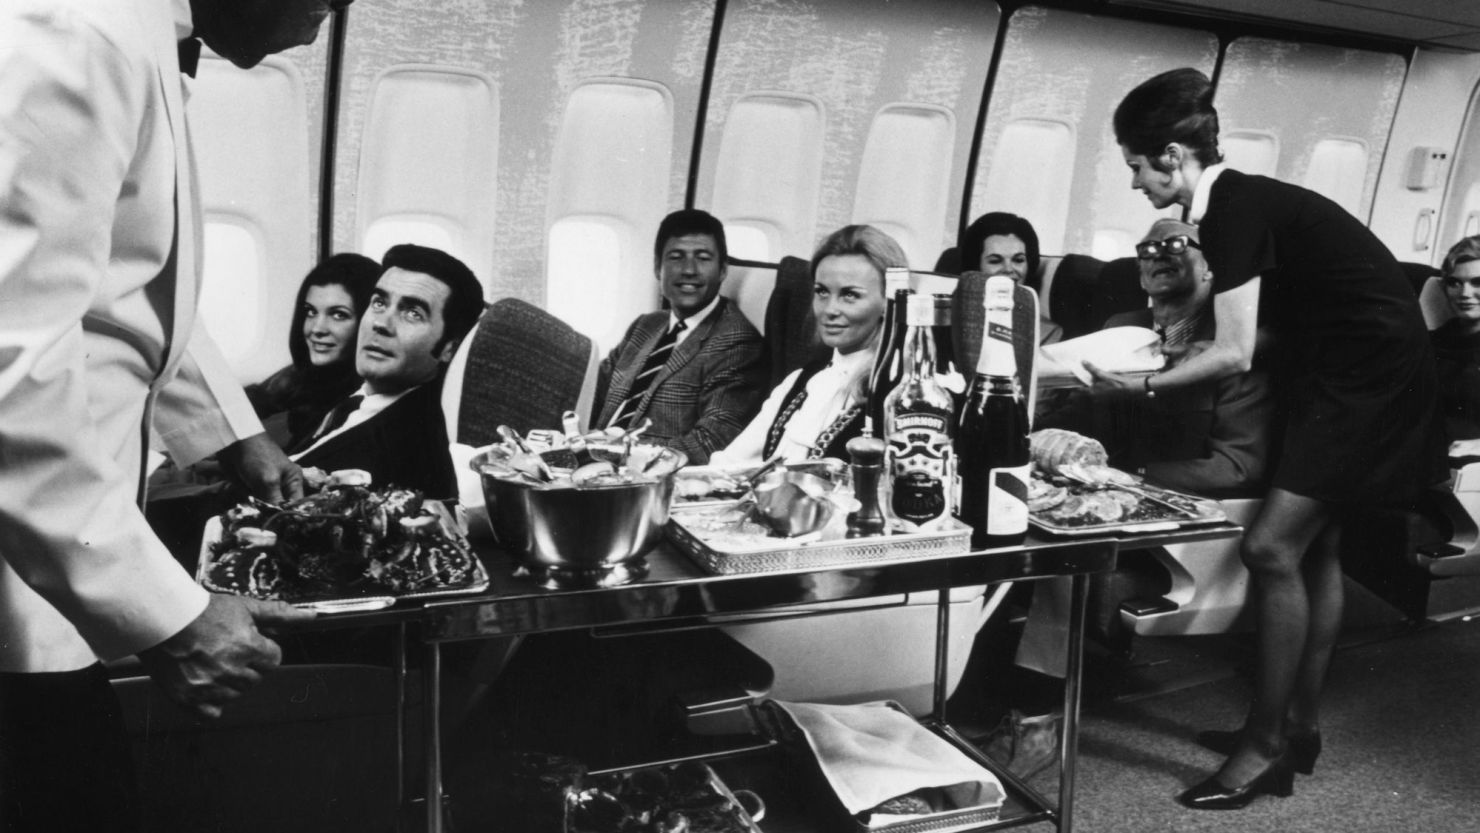 A steward and stewardess serving first-class passengers with drinks and refreshments on board a Boeing 747. (Mid-20th century. year unknown.)